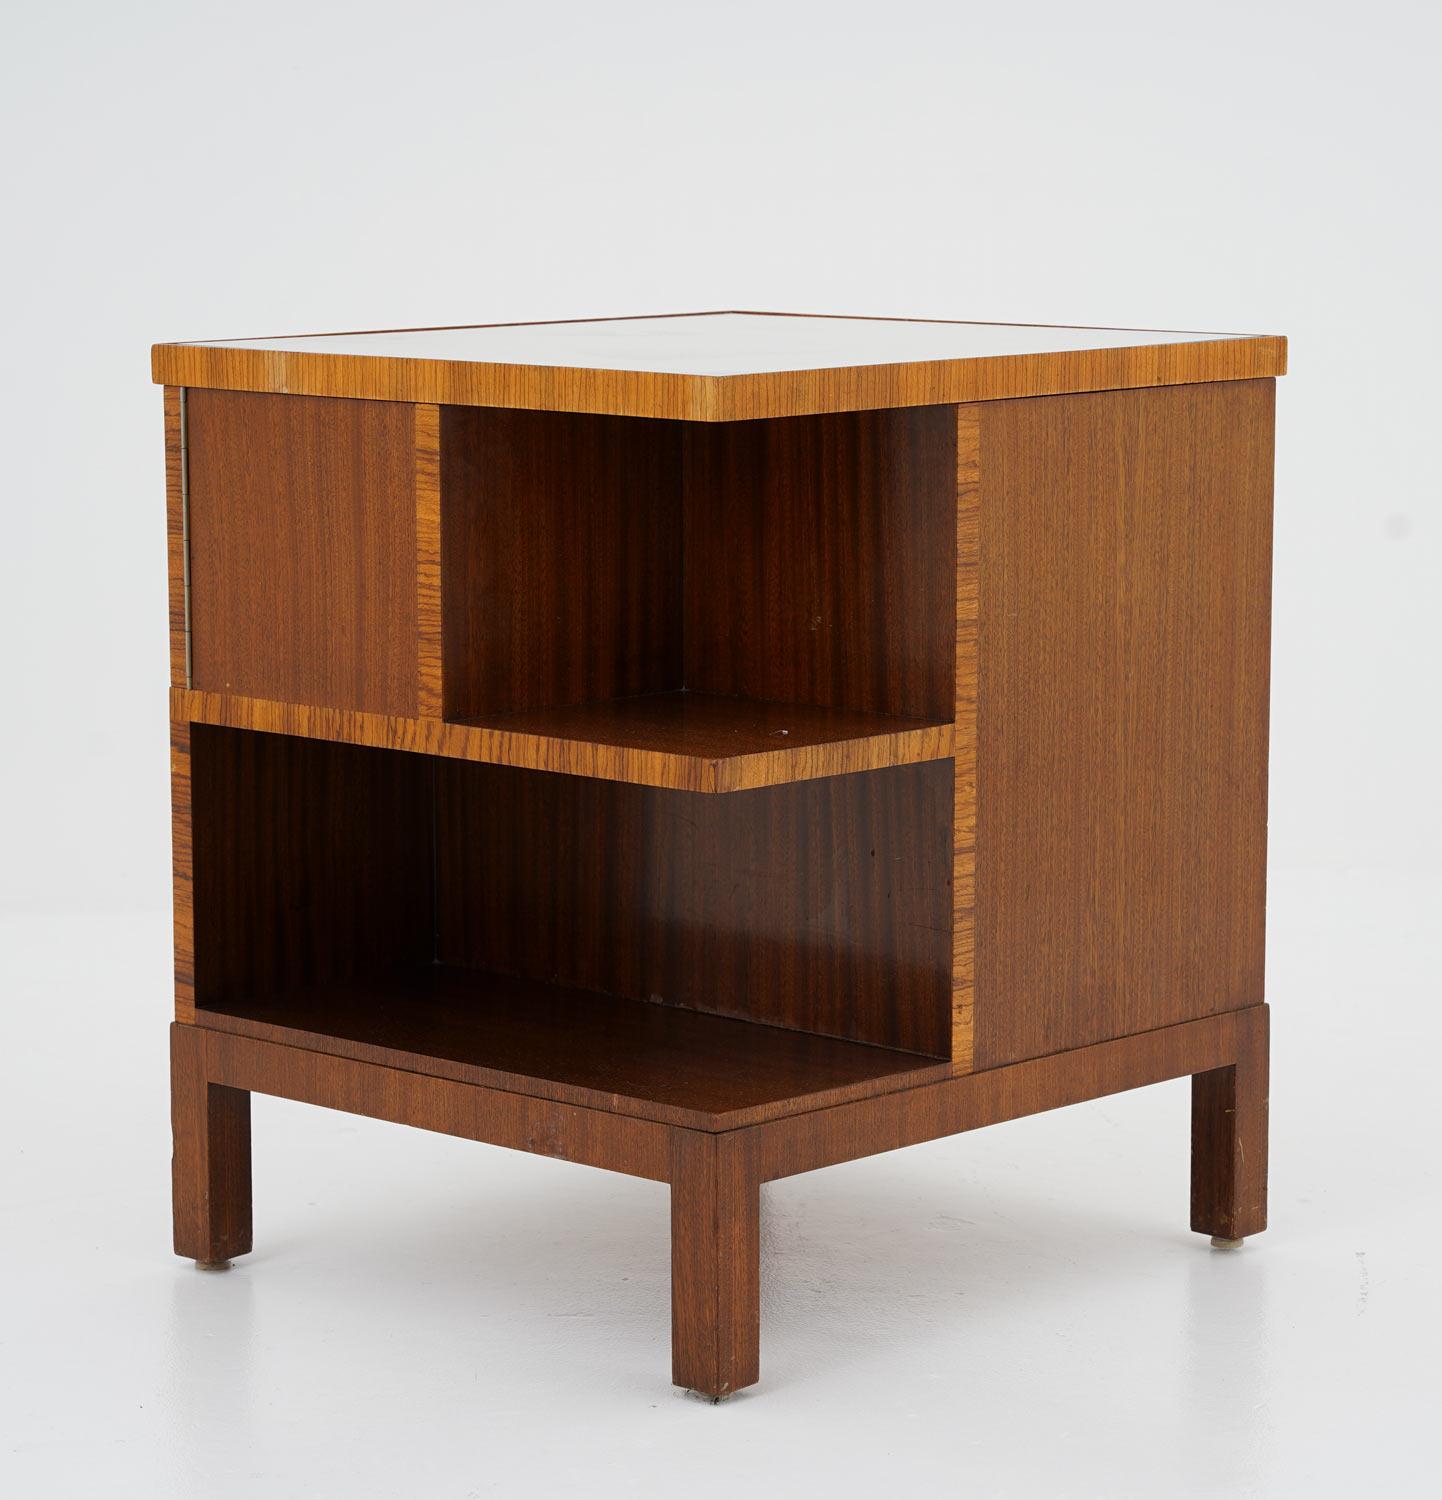 Swedish Art Deco Side Table / Bar Table In Good Condition For Sale In Karlstad, SE